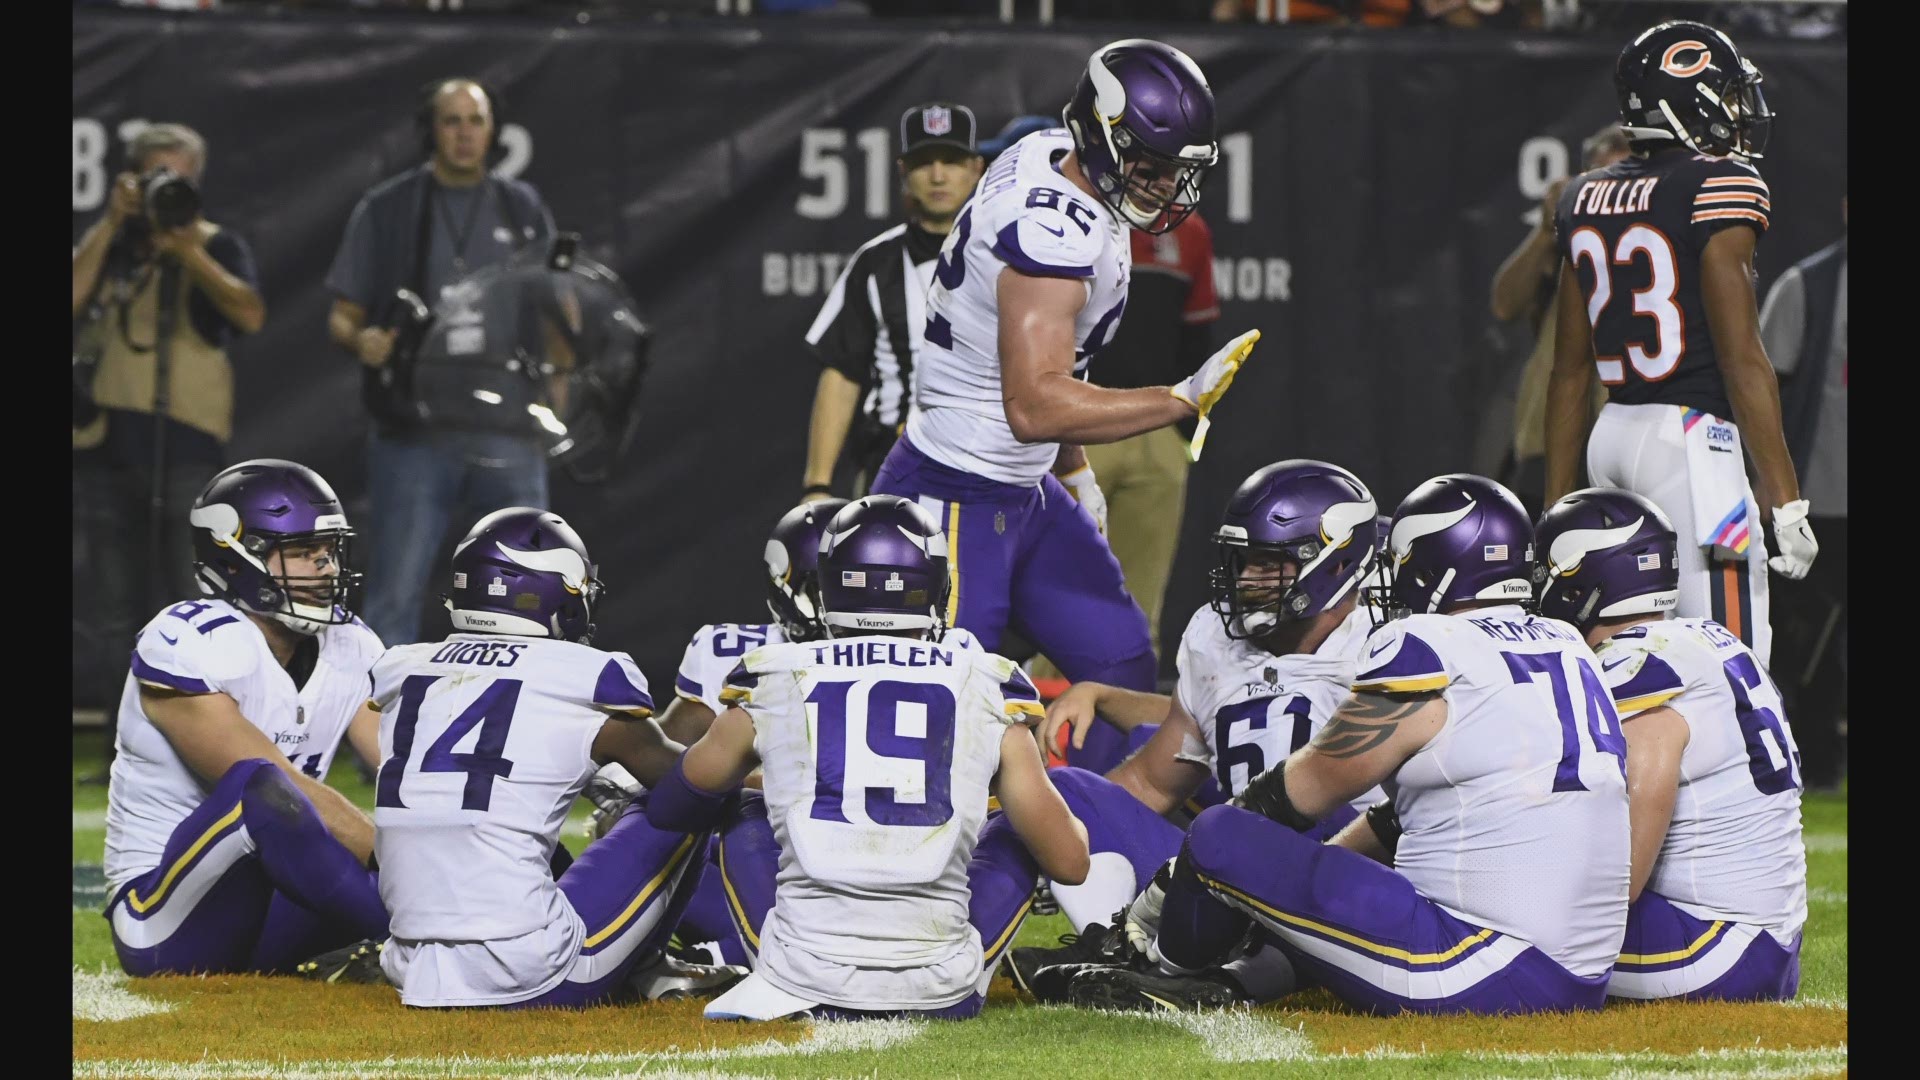 A unique touchdown celebration by the Vikings led to a debate in the locker room after the game, but not about football.